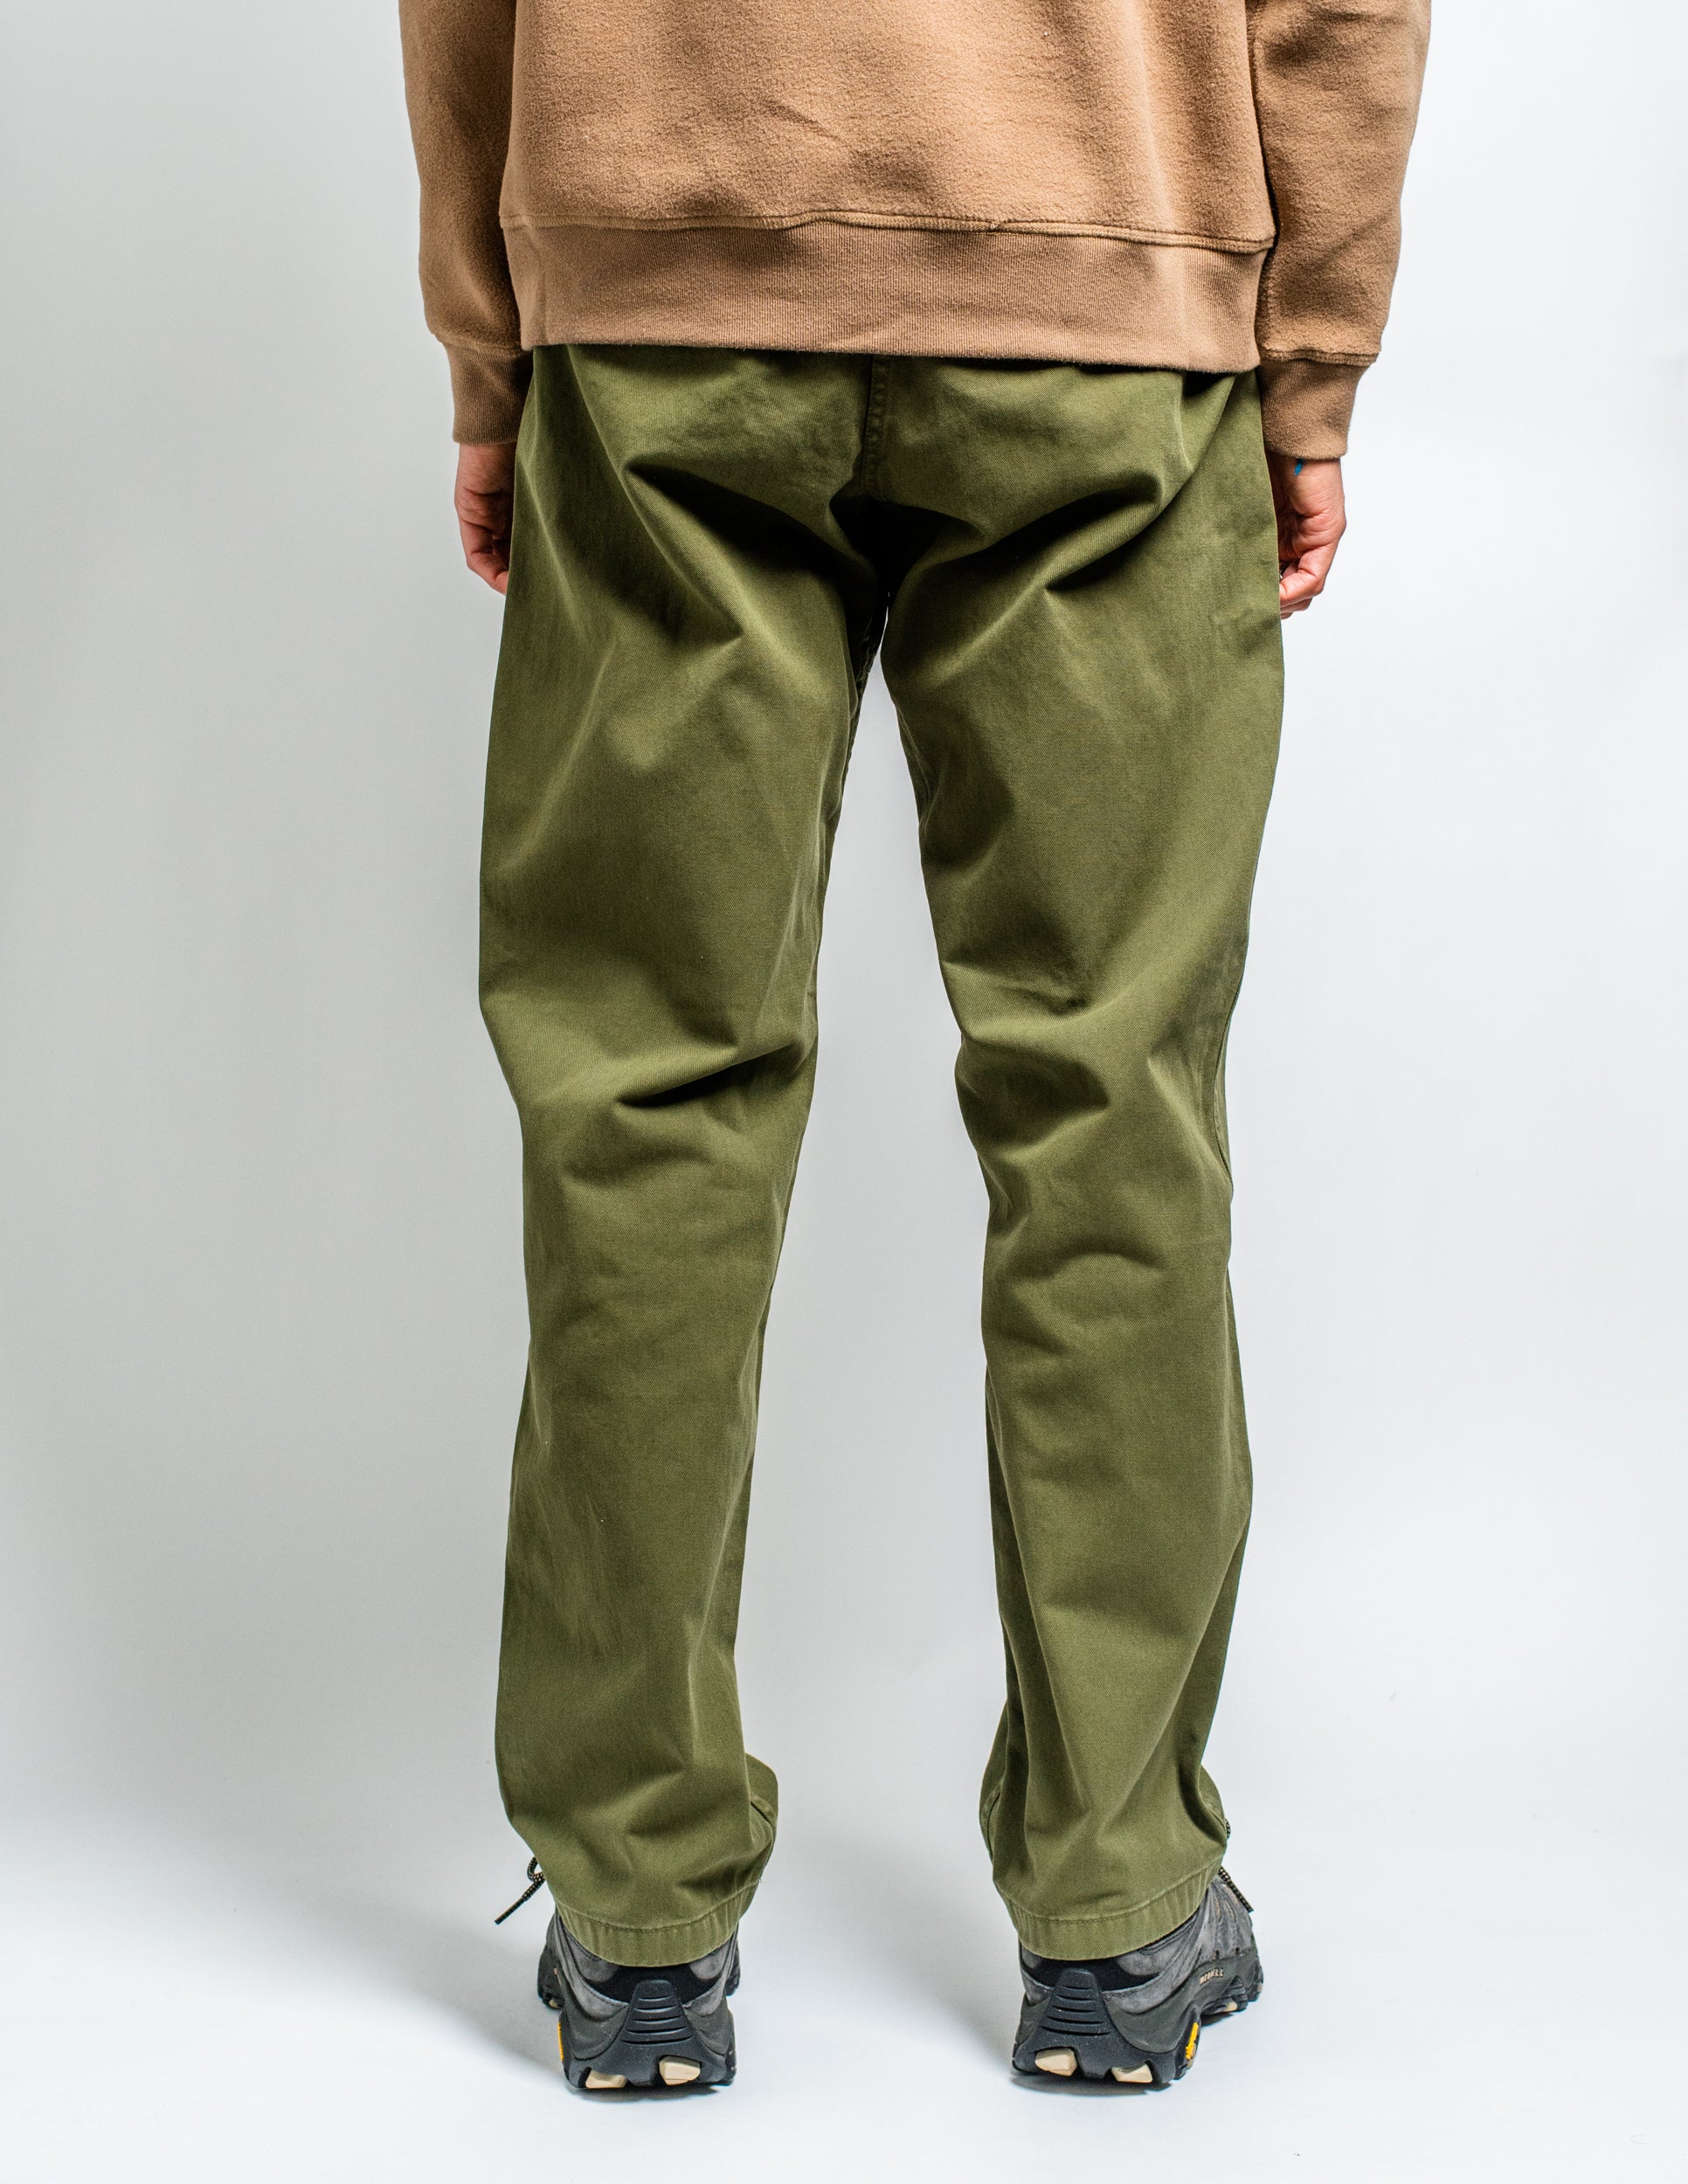 Gramicci Pant in Olive ~ Windthrow